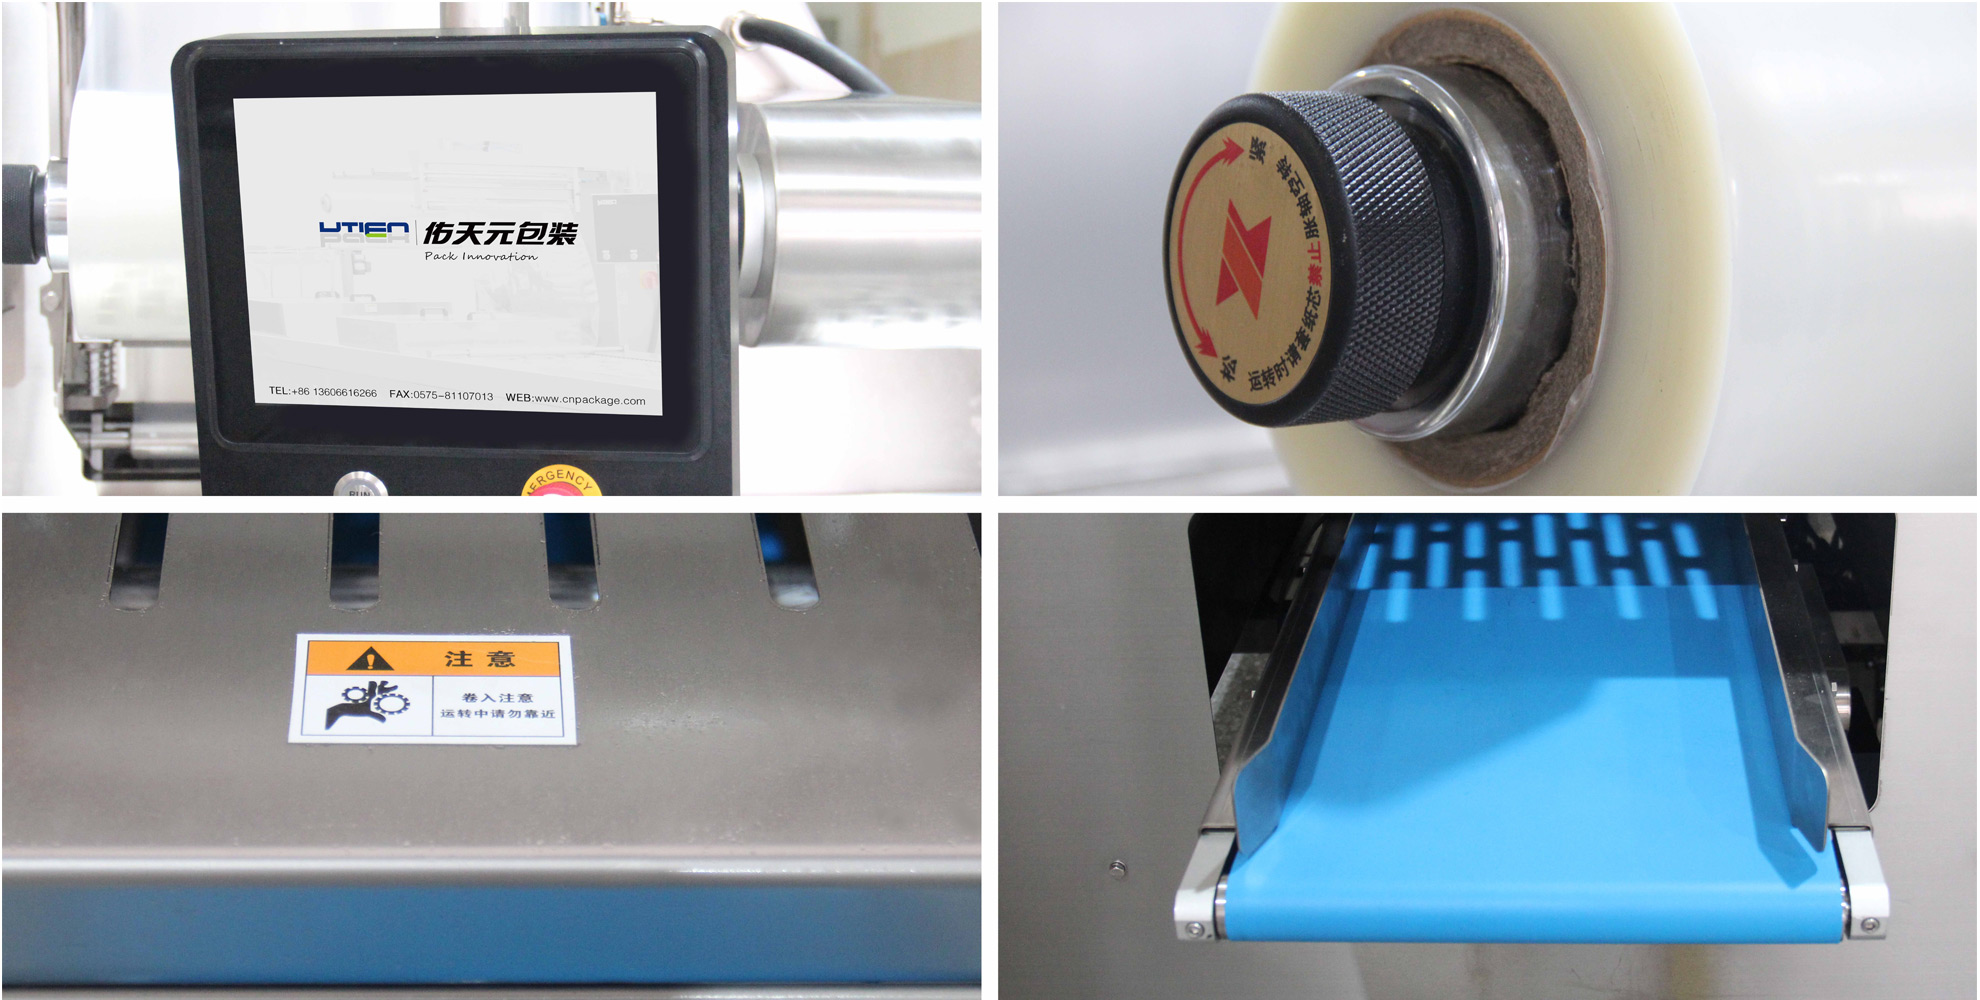 Food tray sealer | thermoformer machine for sale | cosmetic tube sealer - Utien